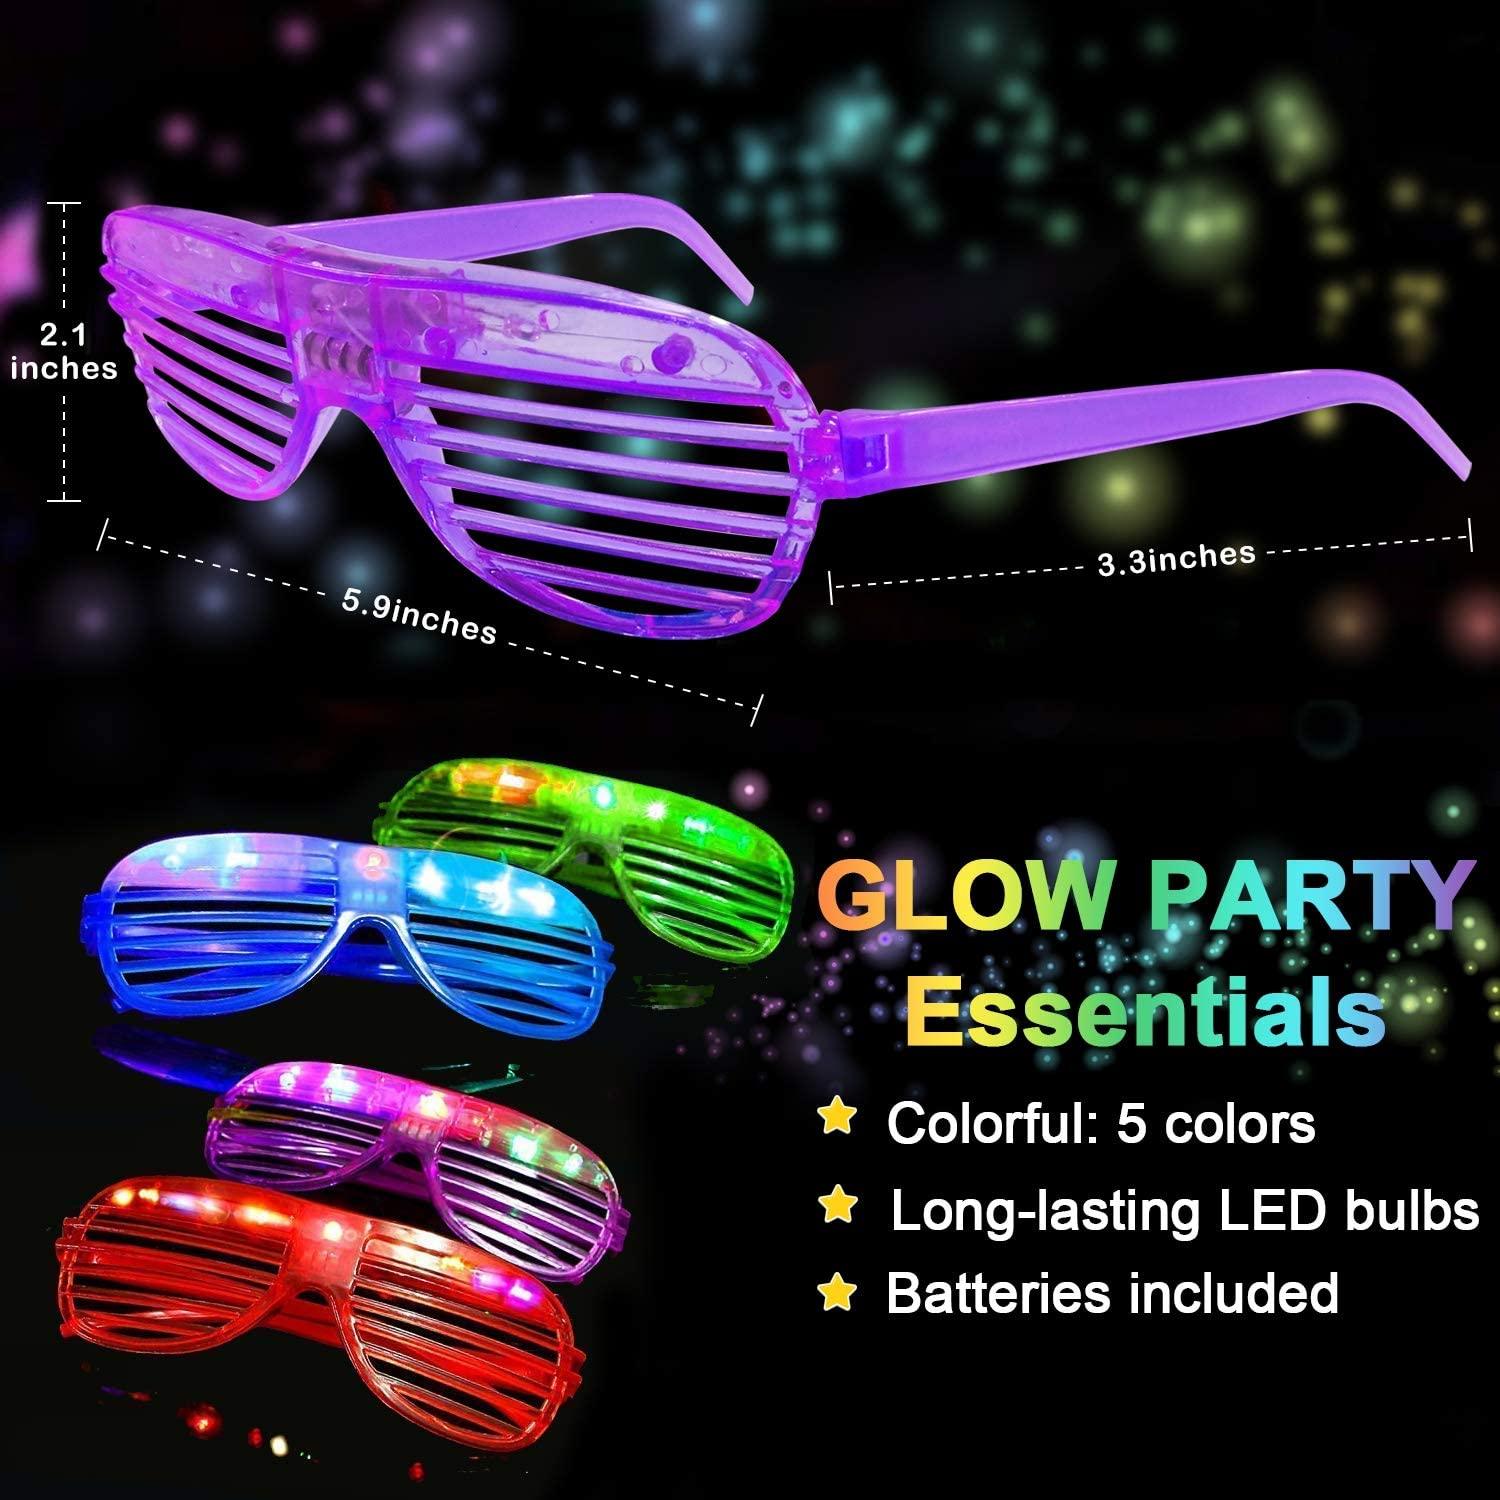 30 Pack LED Glasses, 5 Color Light Up Glasses Shutter Shades Glow Sticks Glasses Glow in The Dark July 4Th Party Supplies - If you say i do